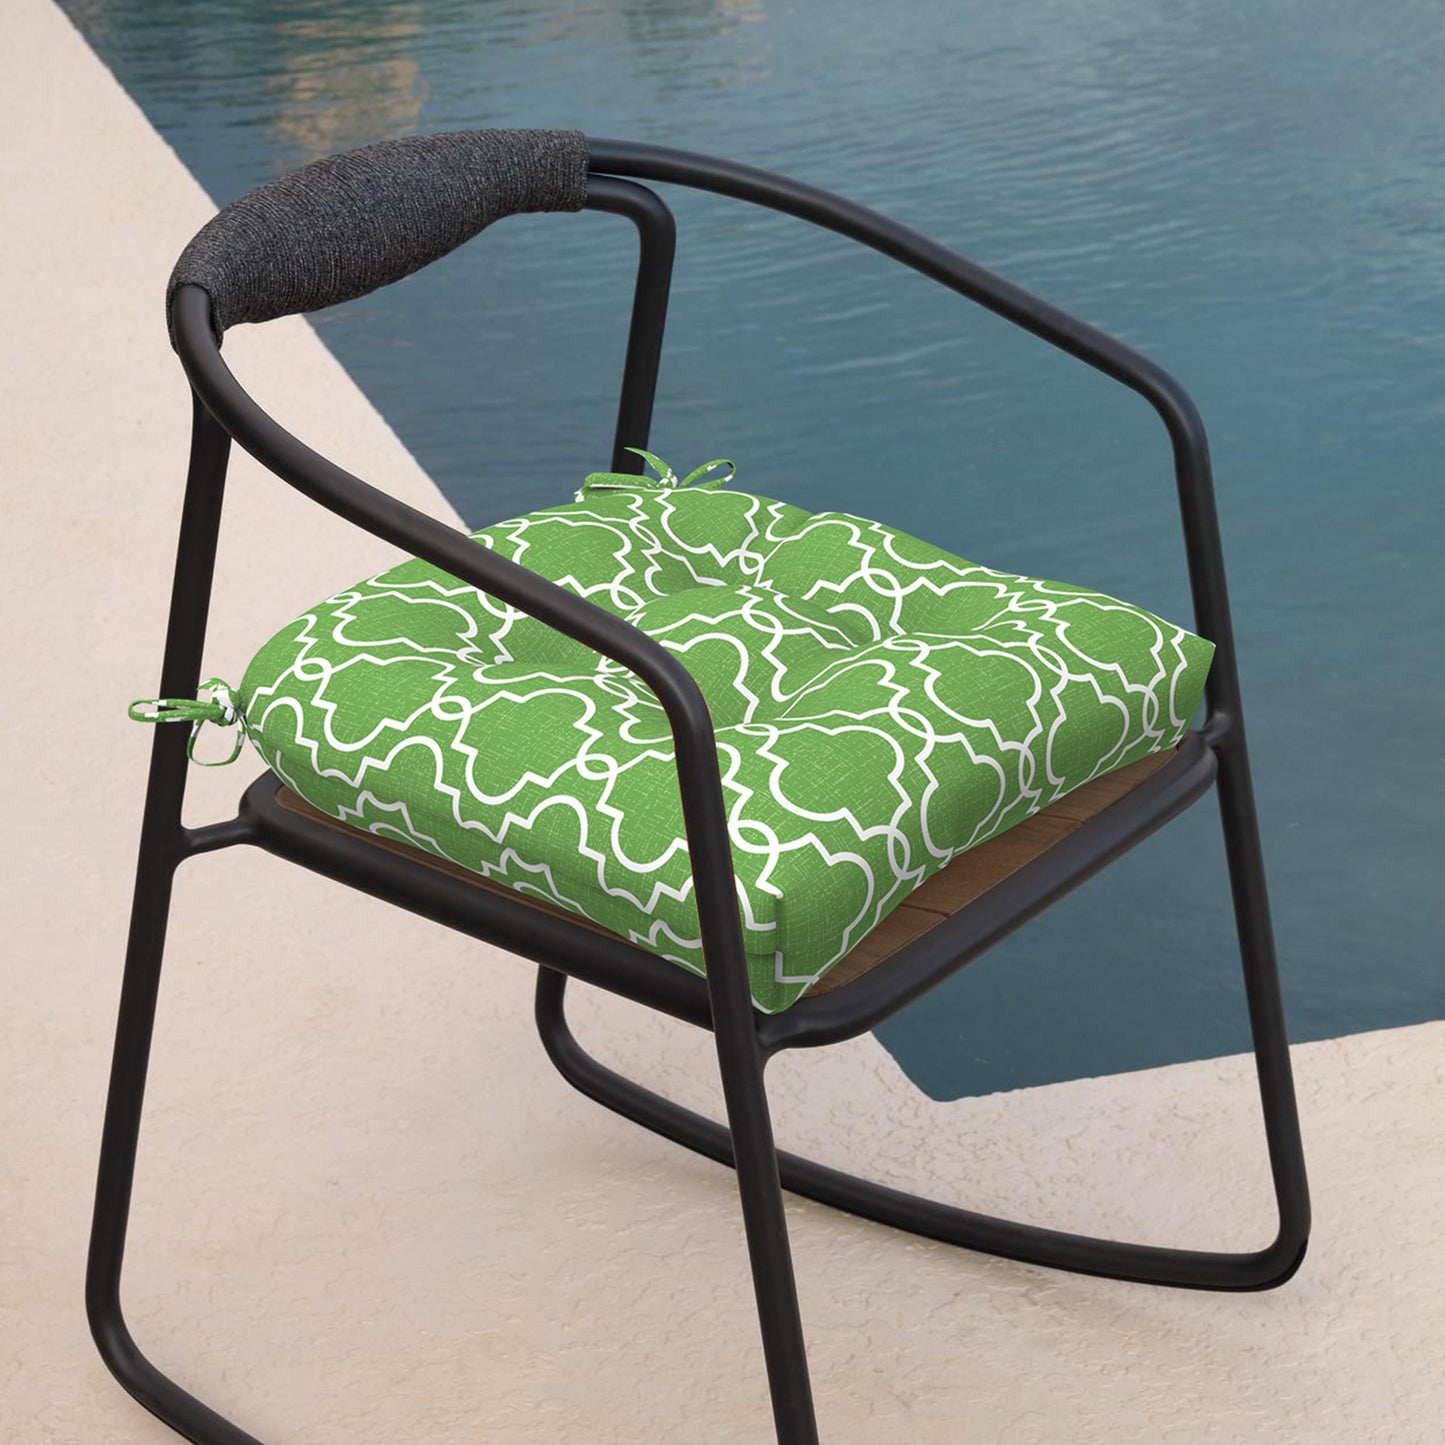 Melody Elephant Patio Wicker Chair Cushions, All Weather Outdoor Tufted Chair Pads Pack of 2, 19 x 19 x 5 Inch U-Shaped Seat Cushions of Garden Furniture Decoration, Carmody Green